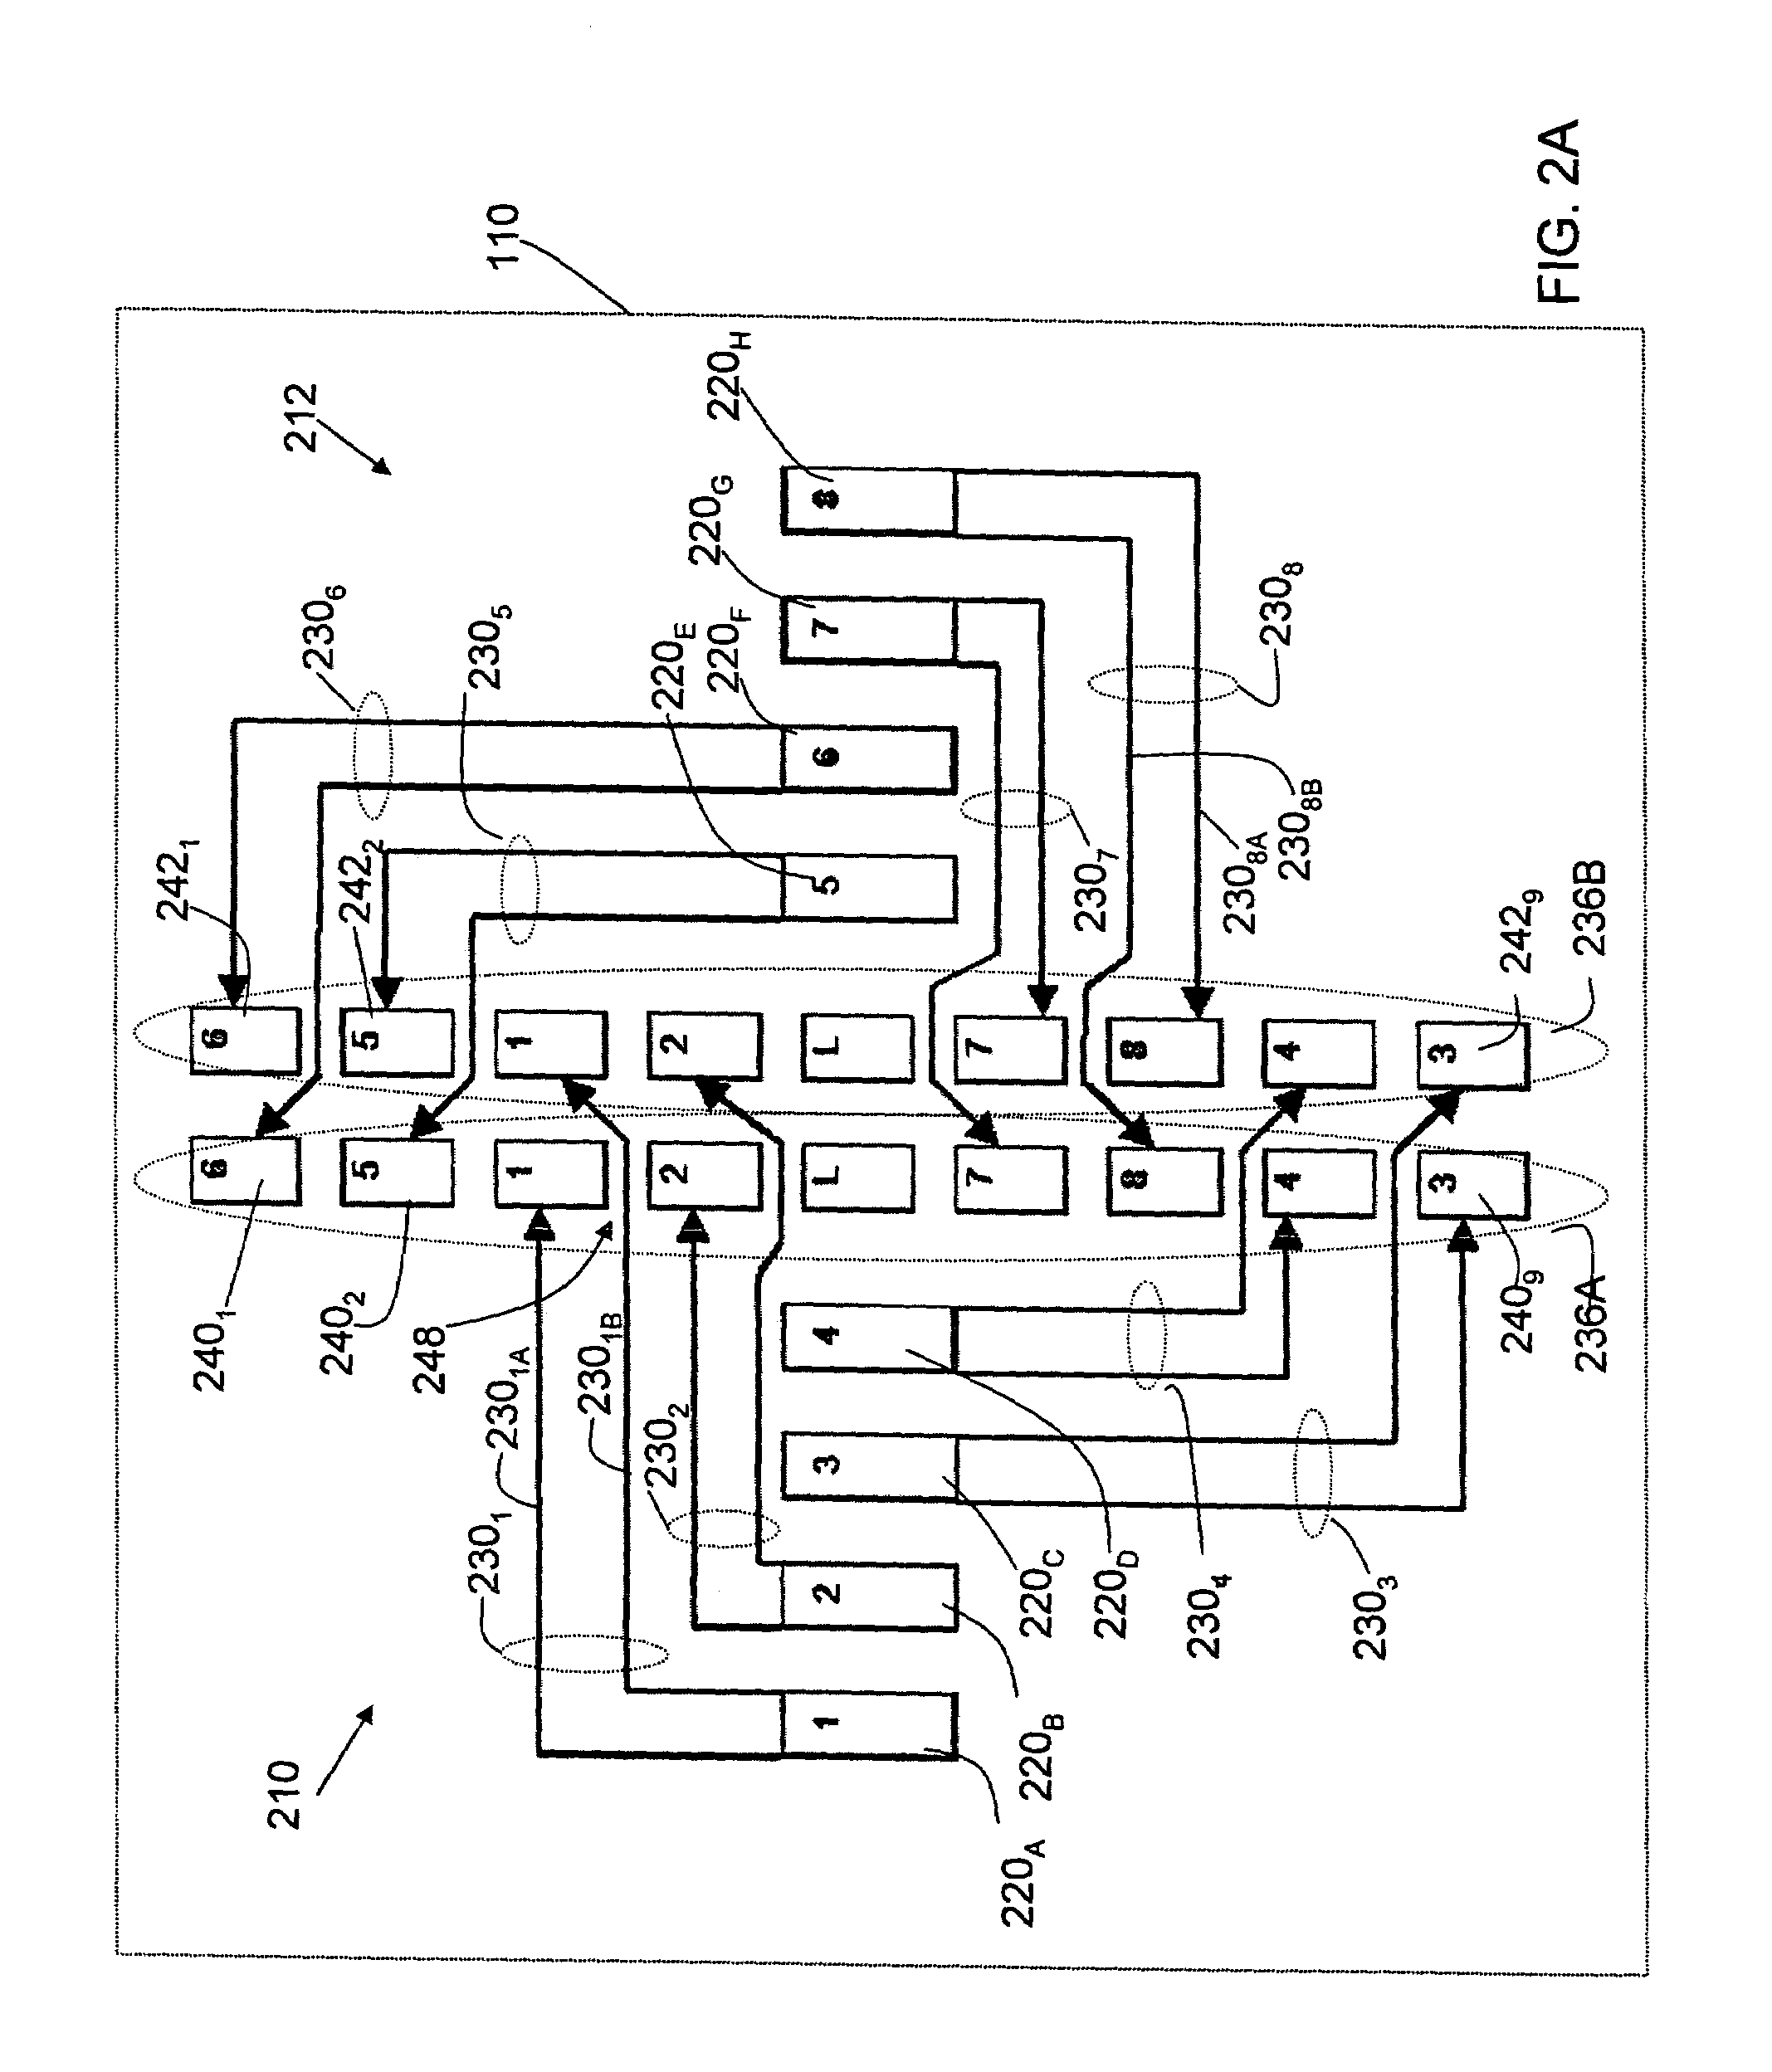 Backplane with routing to reduce layer count